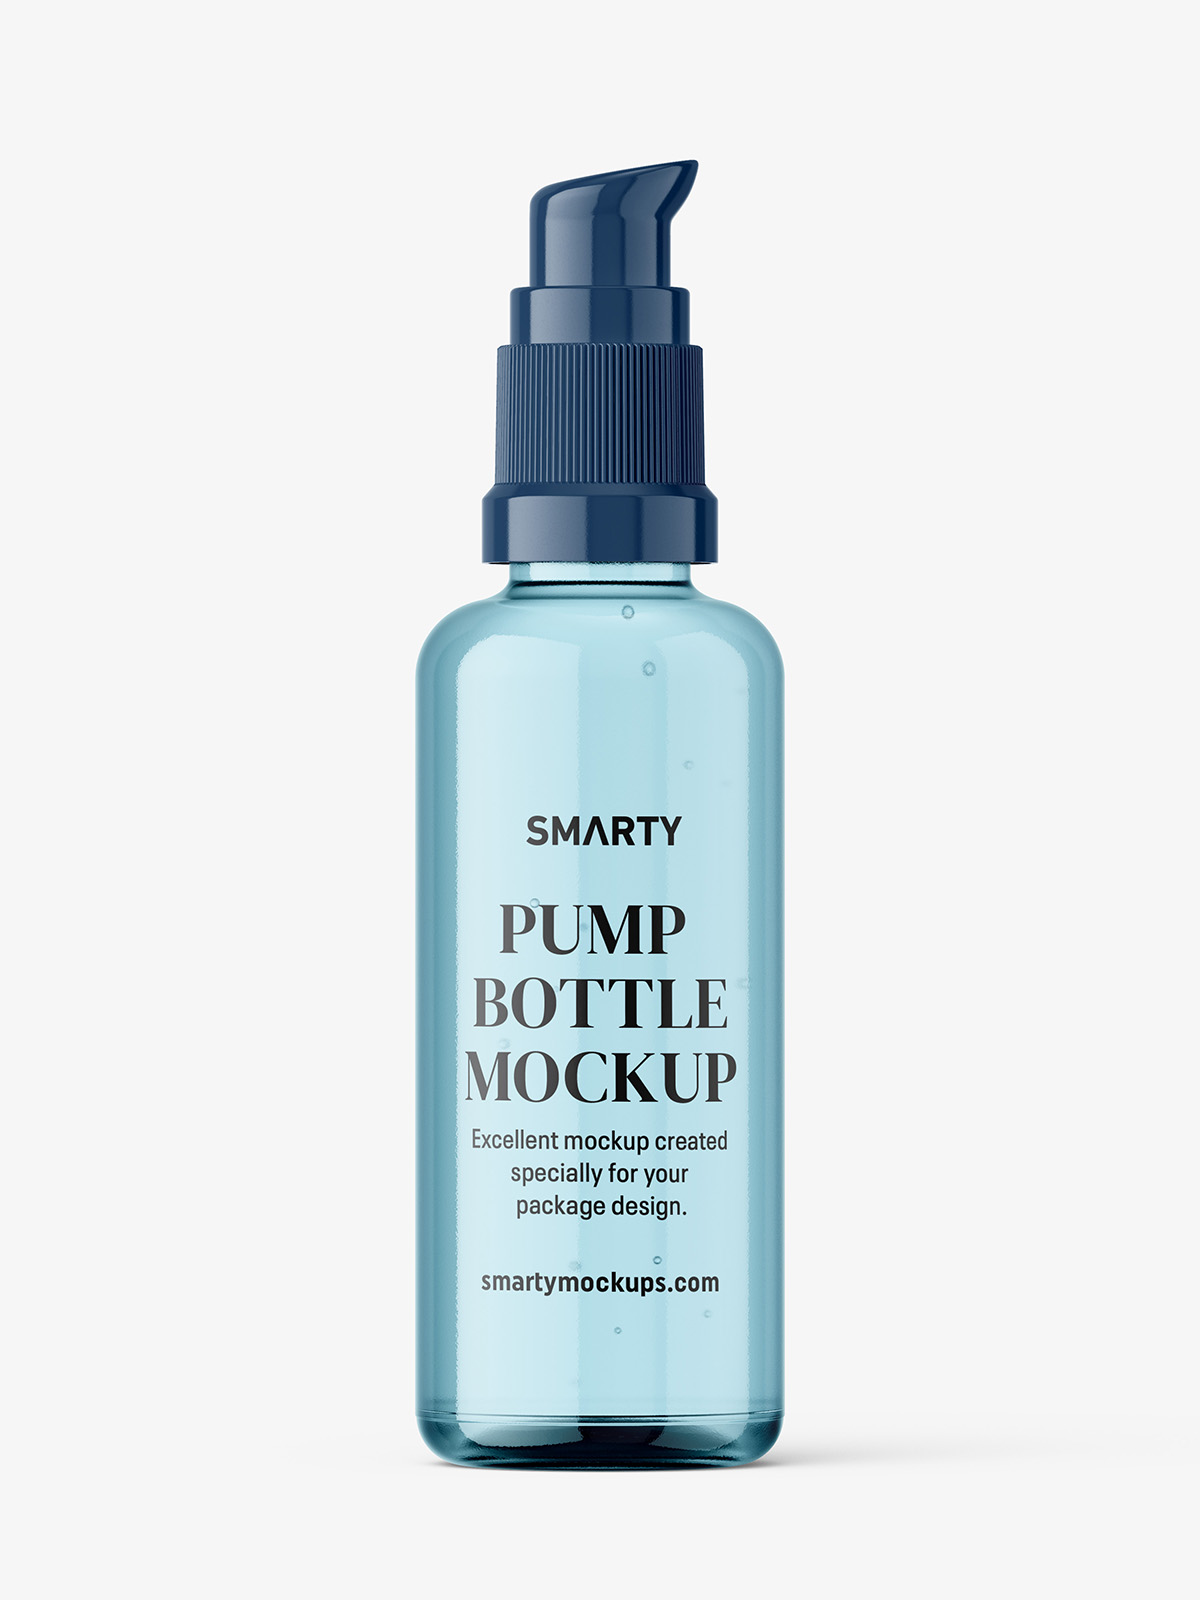 Download Airless pump bottle mockup / clear - Smarty Mockups